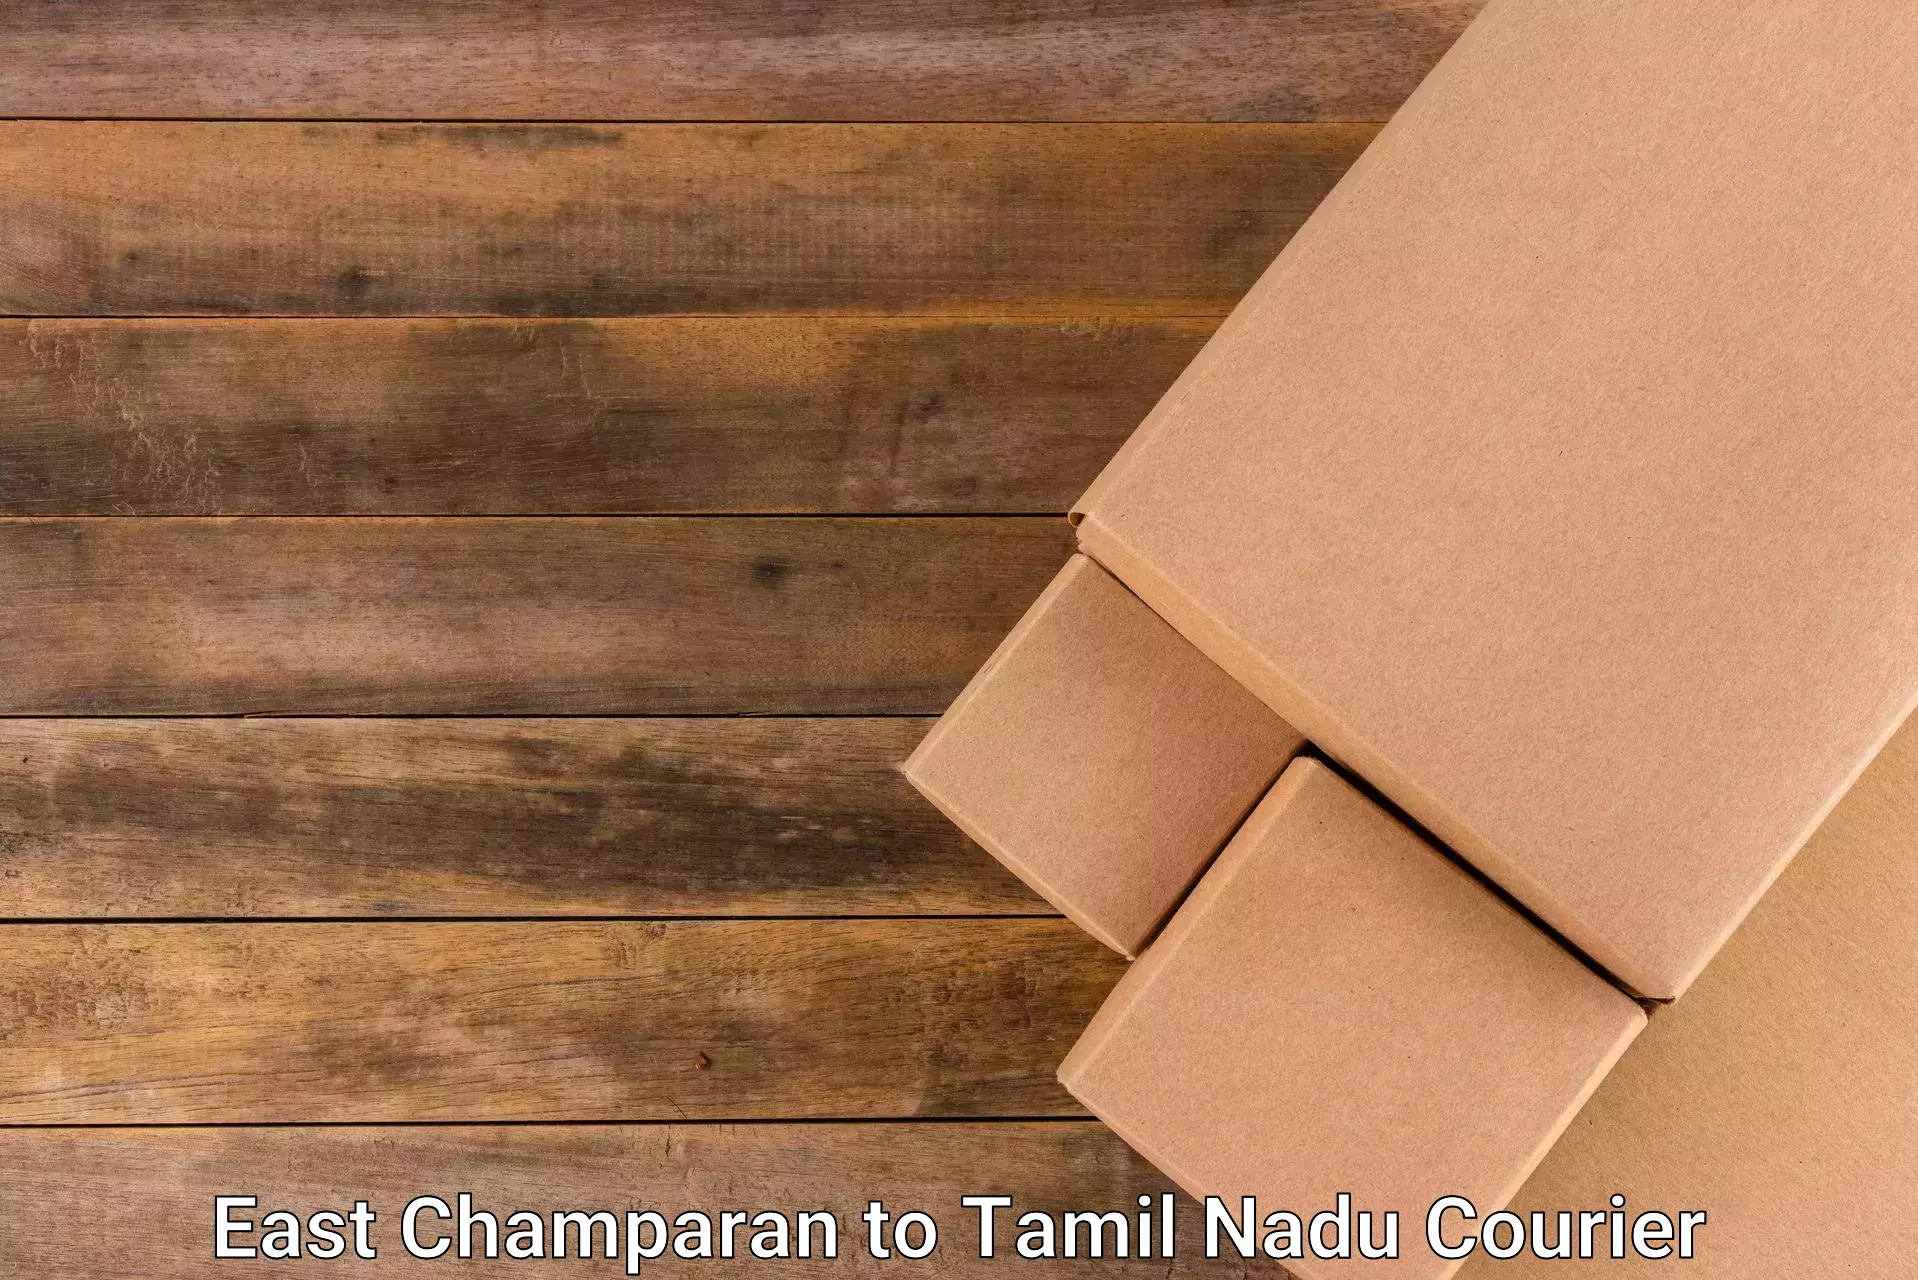 24-hour courier services East Champaran to Tiruvallur